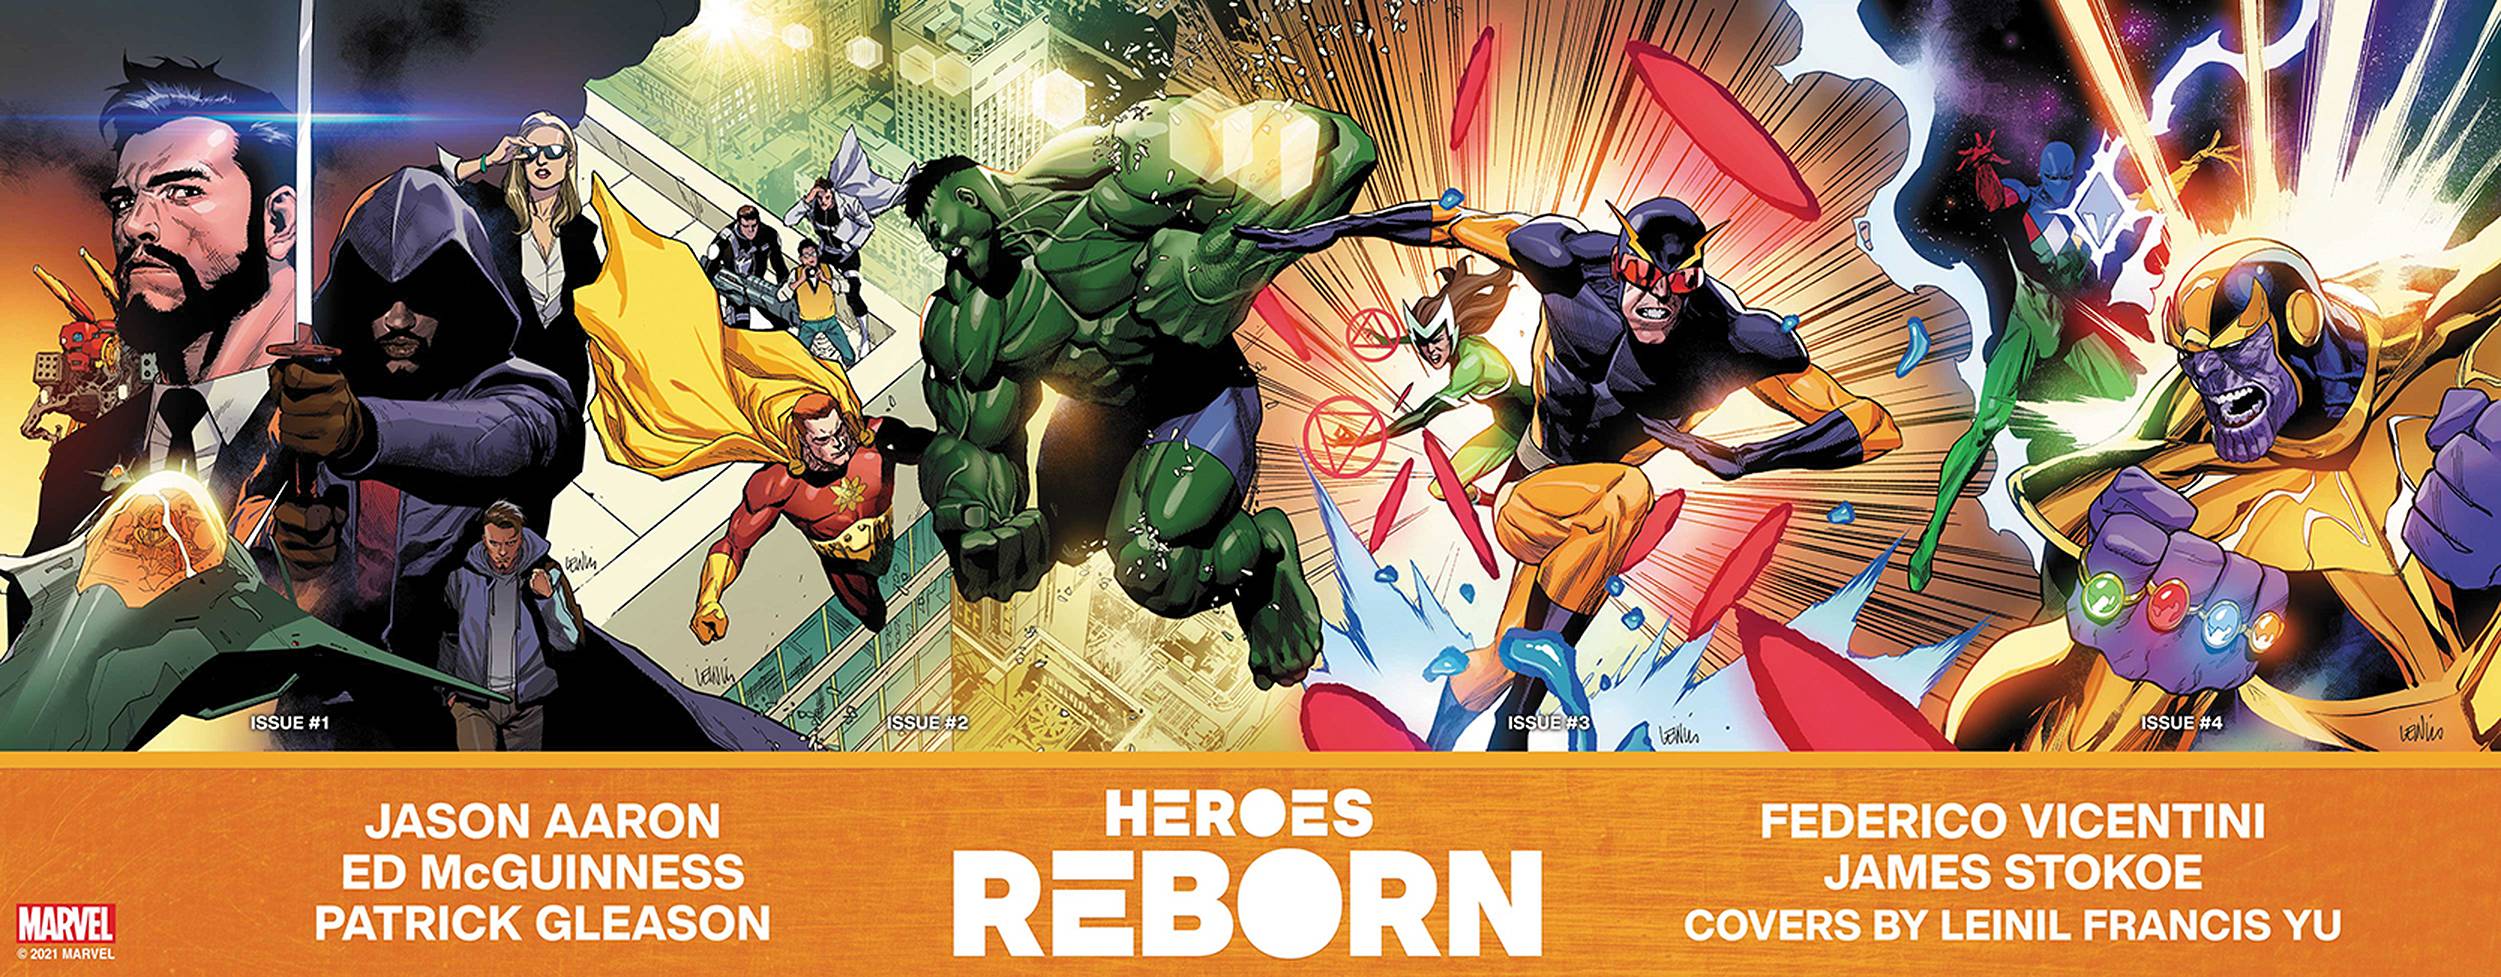 DF HEROES REBORN #1 MCGUINNESS SGN